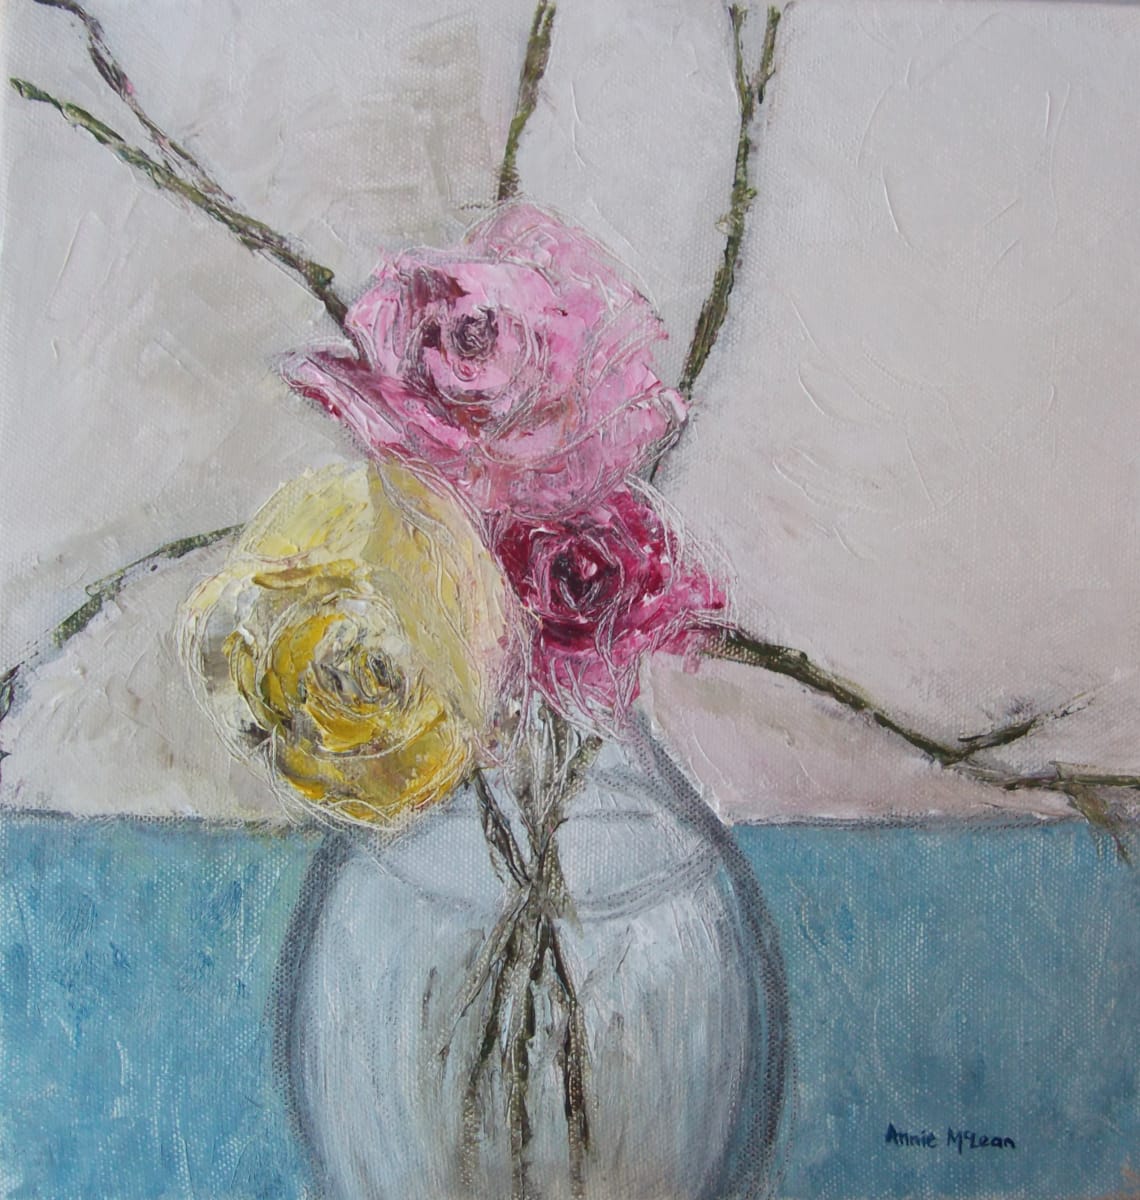 Roses From Granny's Cottage by Annie McLean  Image: ROSES FROM GRANNY'S COTTAGE by Annie McLean